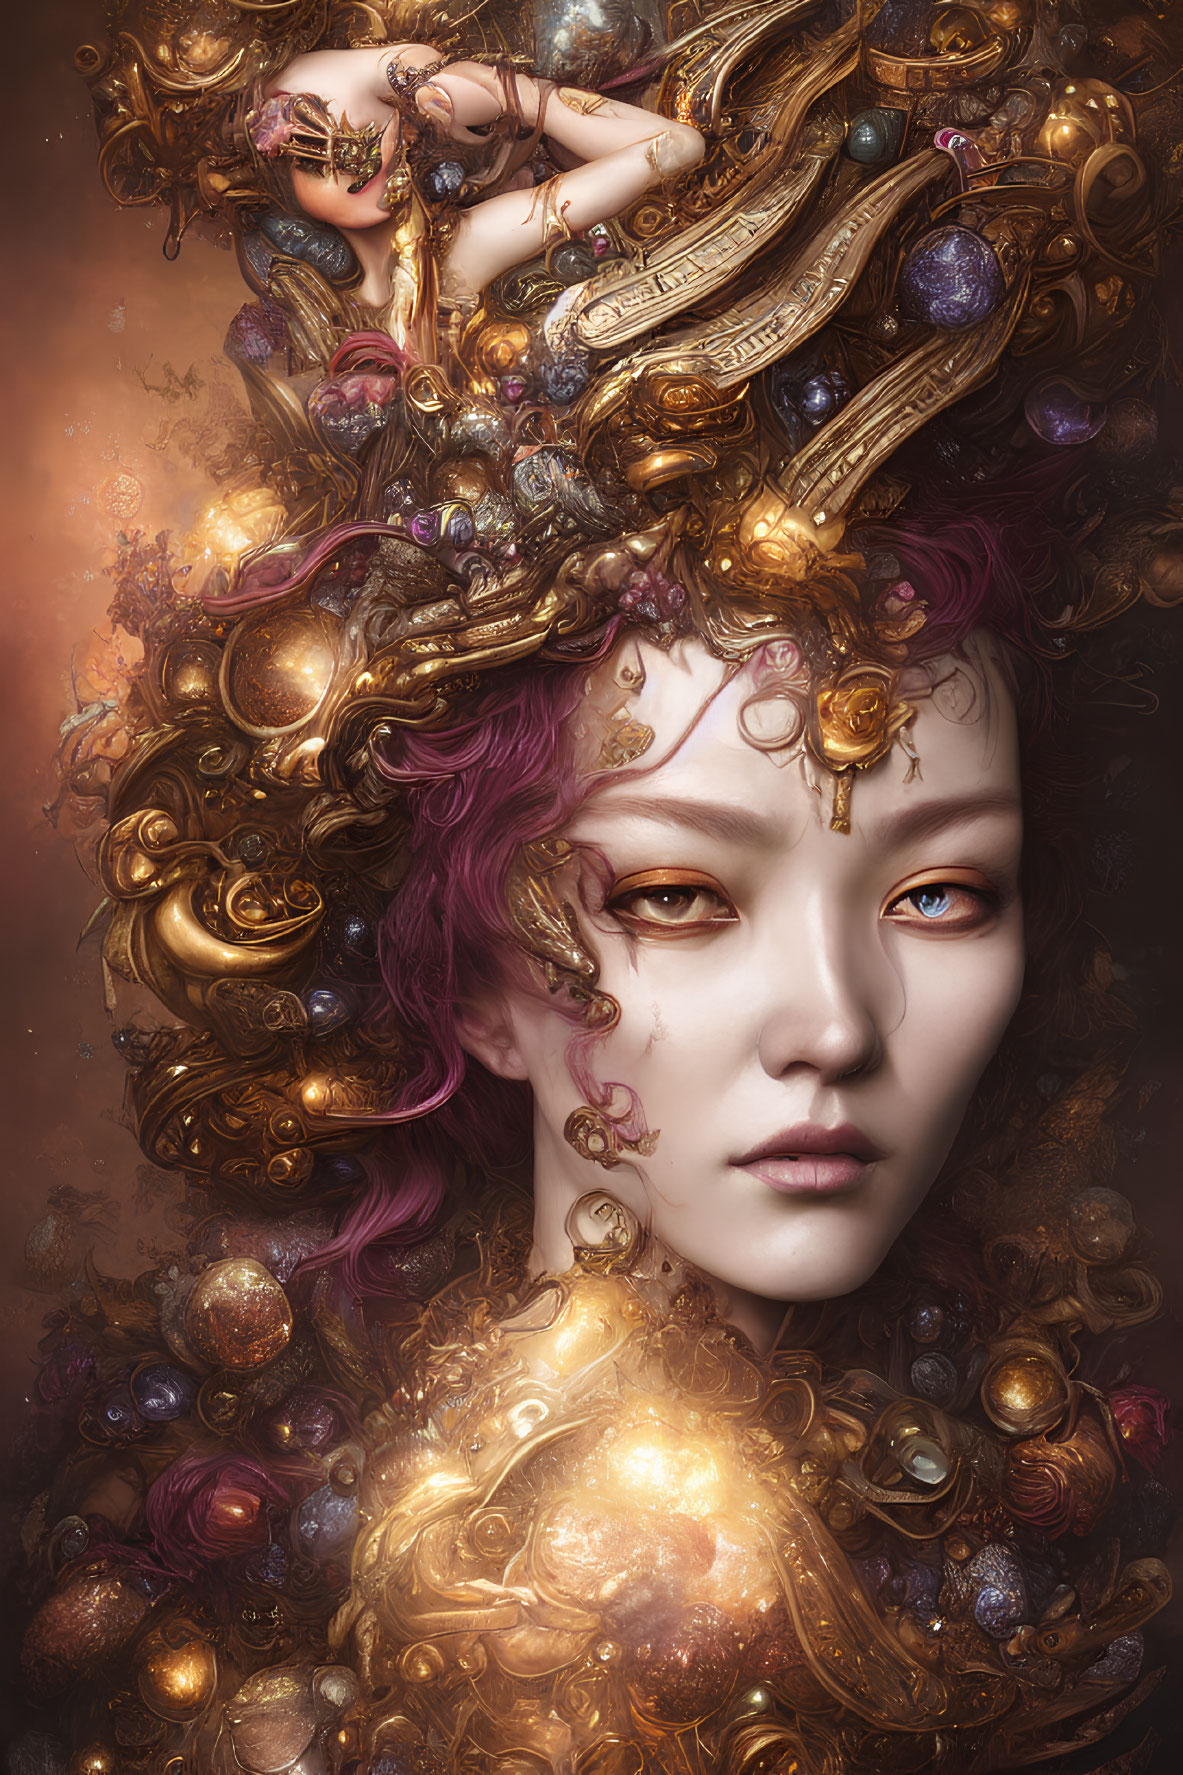 Fantastical portrait of figure with golden headdress and glowing orbs